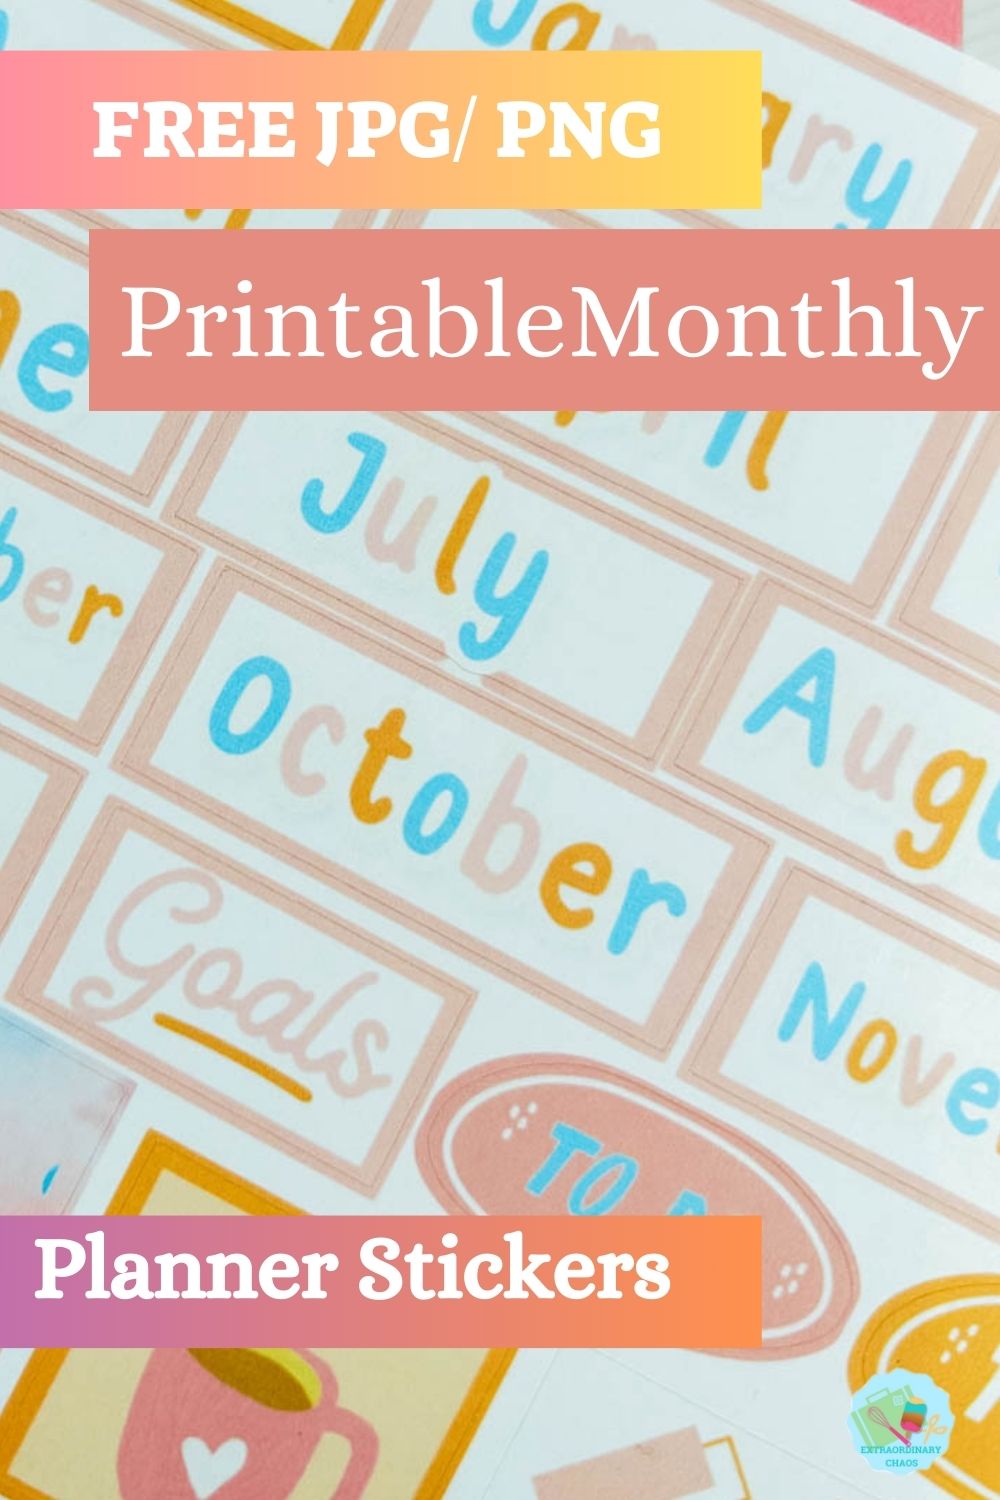 Free JPG PNG Printable Monthly planner stickers for print then cut projects